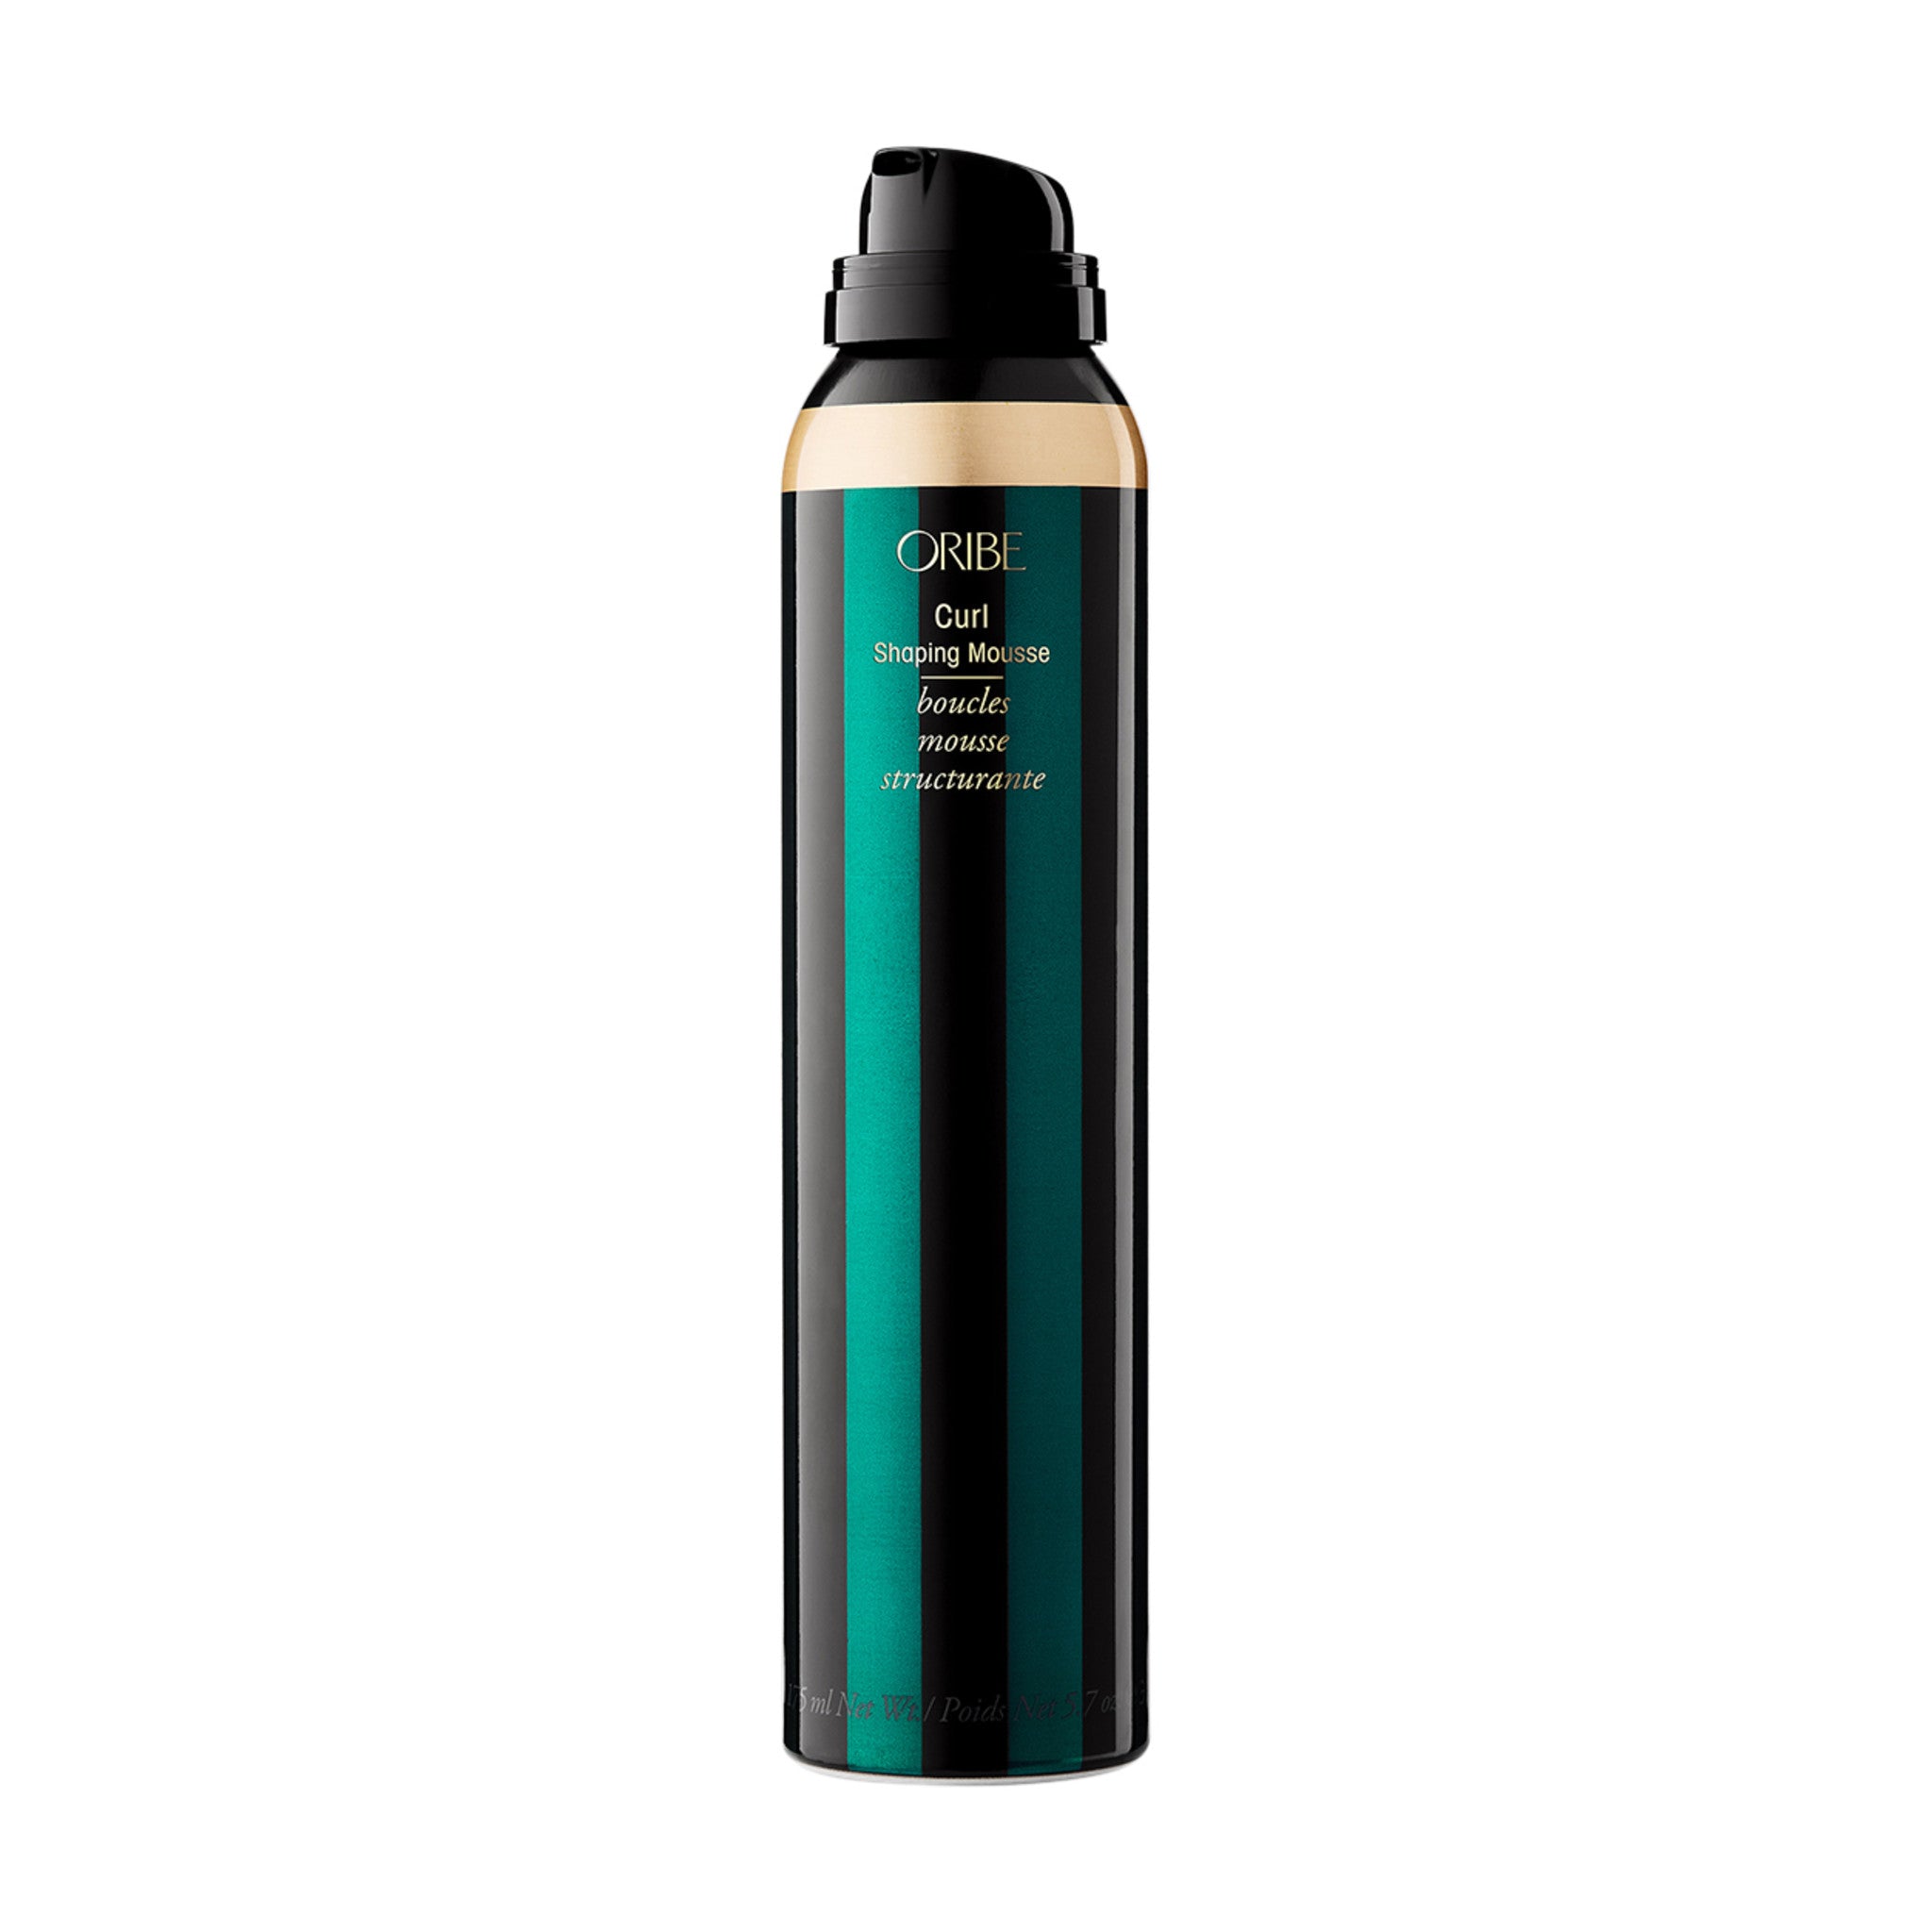 Oribe Curl Shaping Mousse Size variant: 5.7 oz main image.